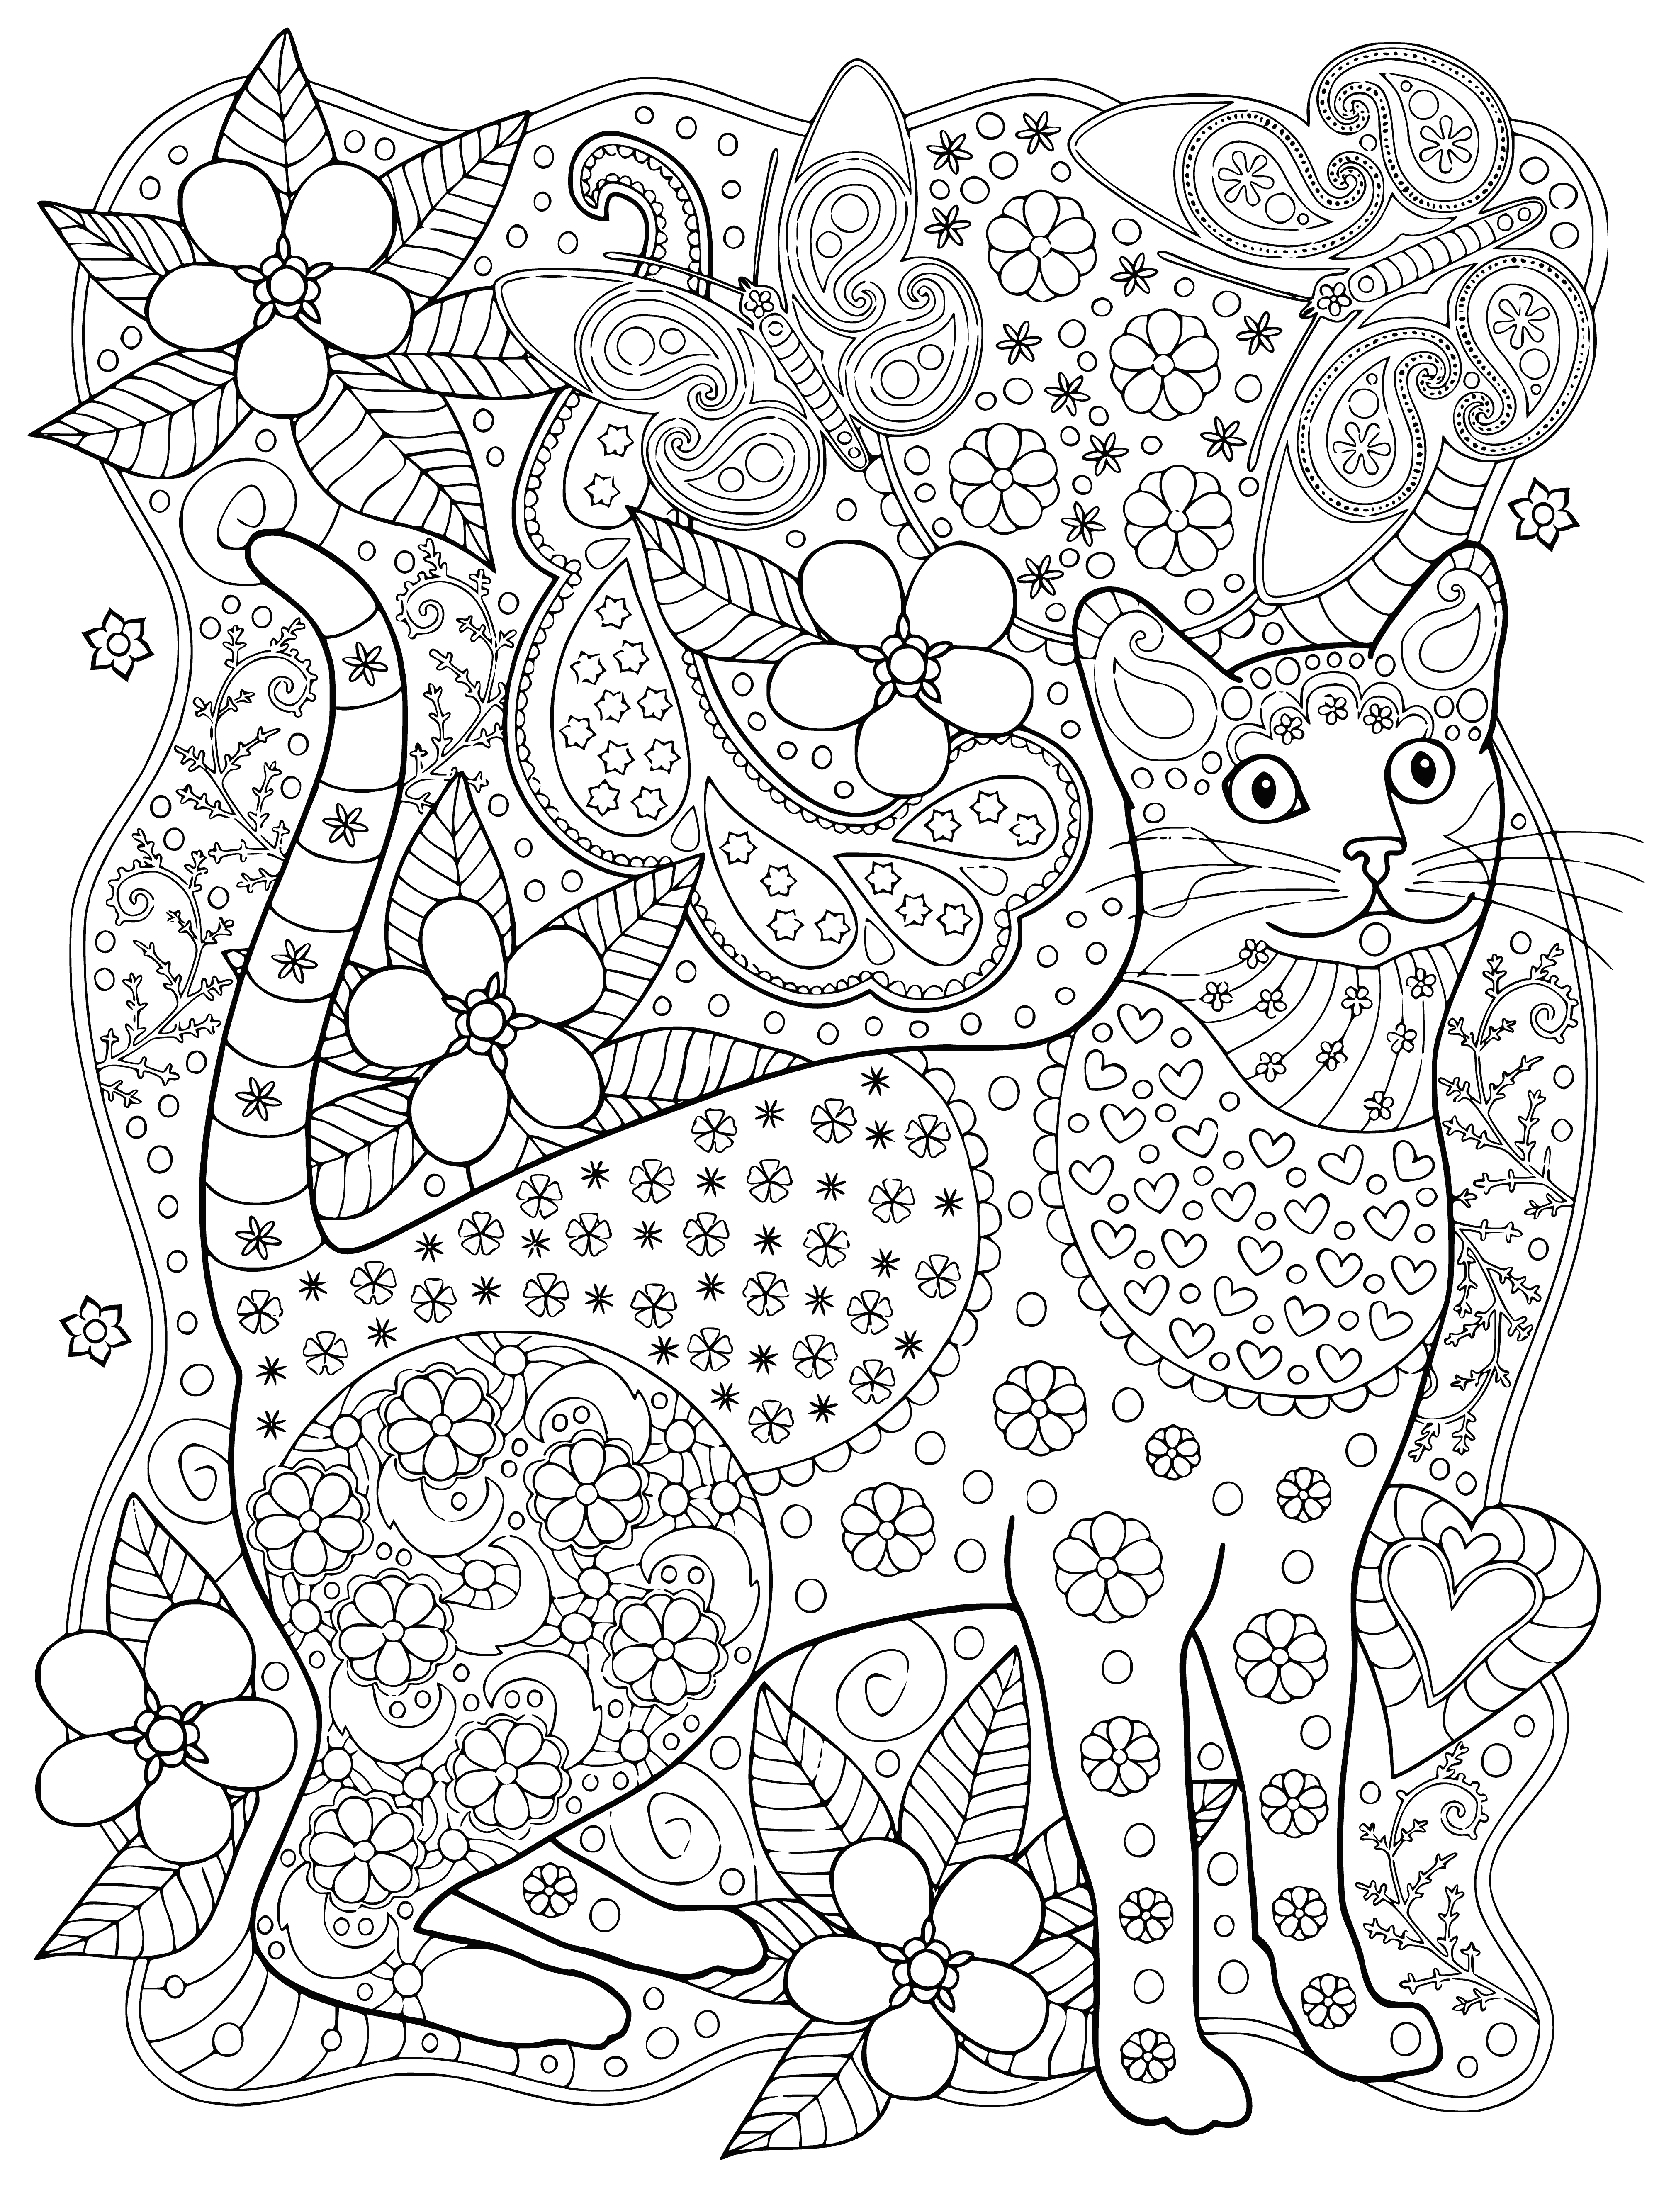 coloring page: Two cats, one yellow & one black & white, are sitting on a tree branch; the yellow cat has a butterfly on its nose.